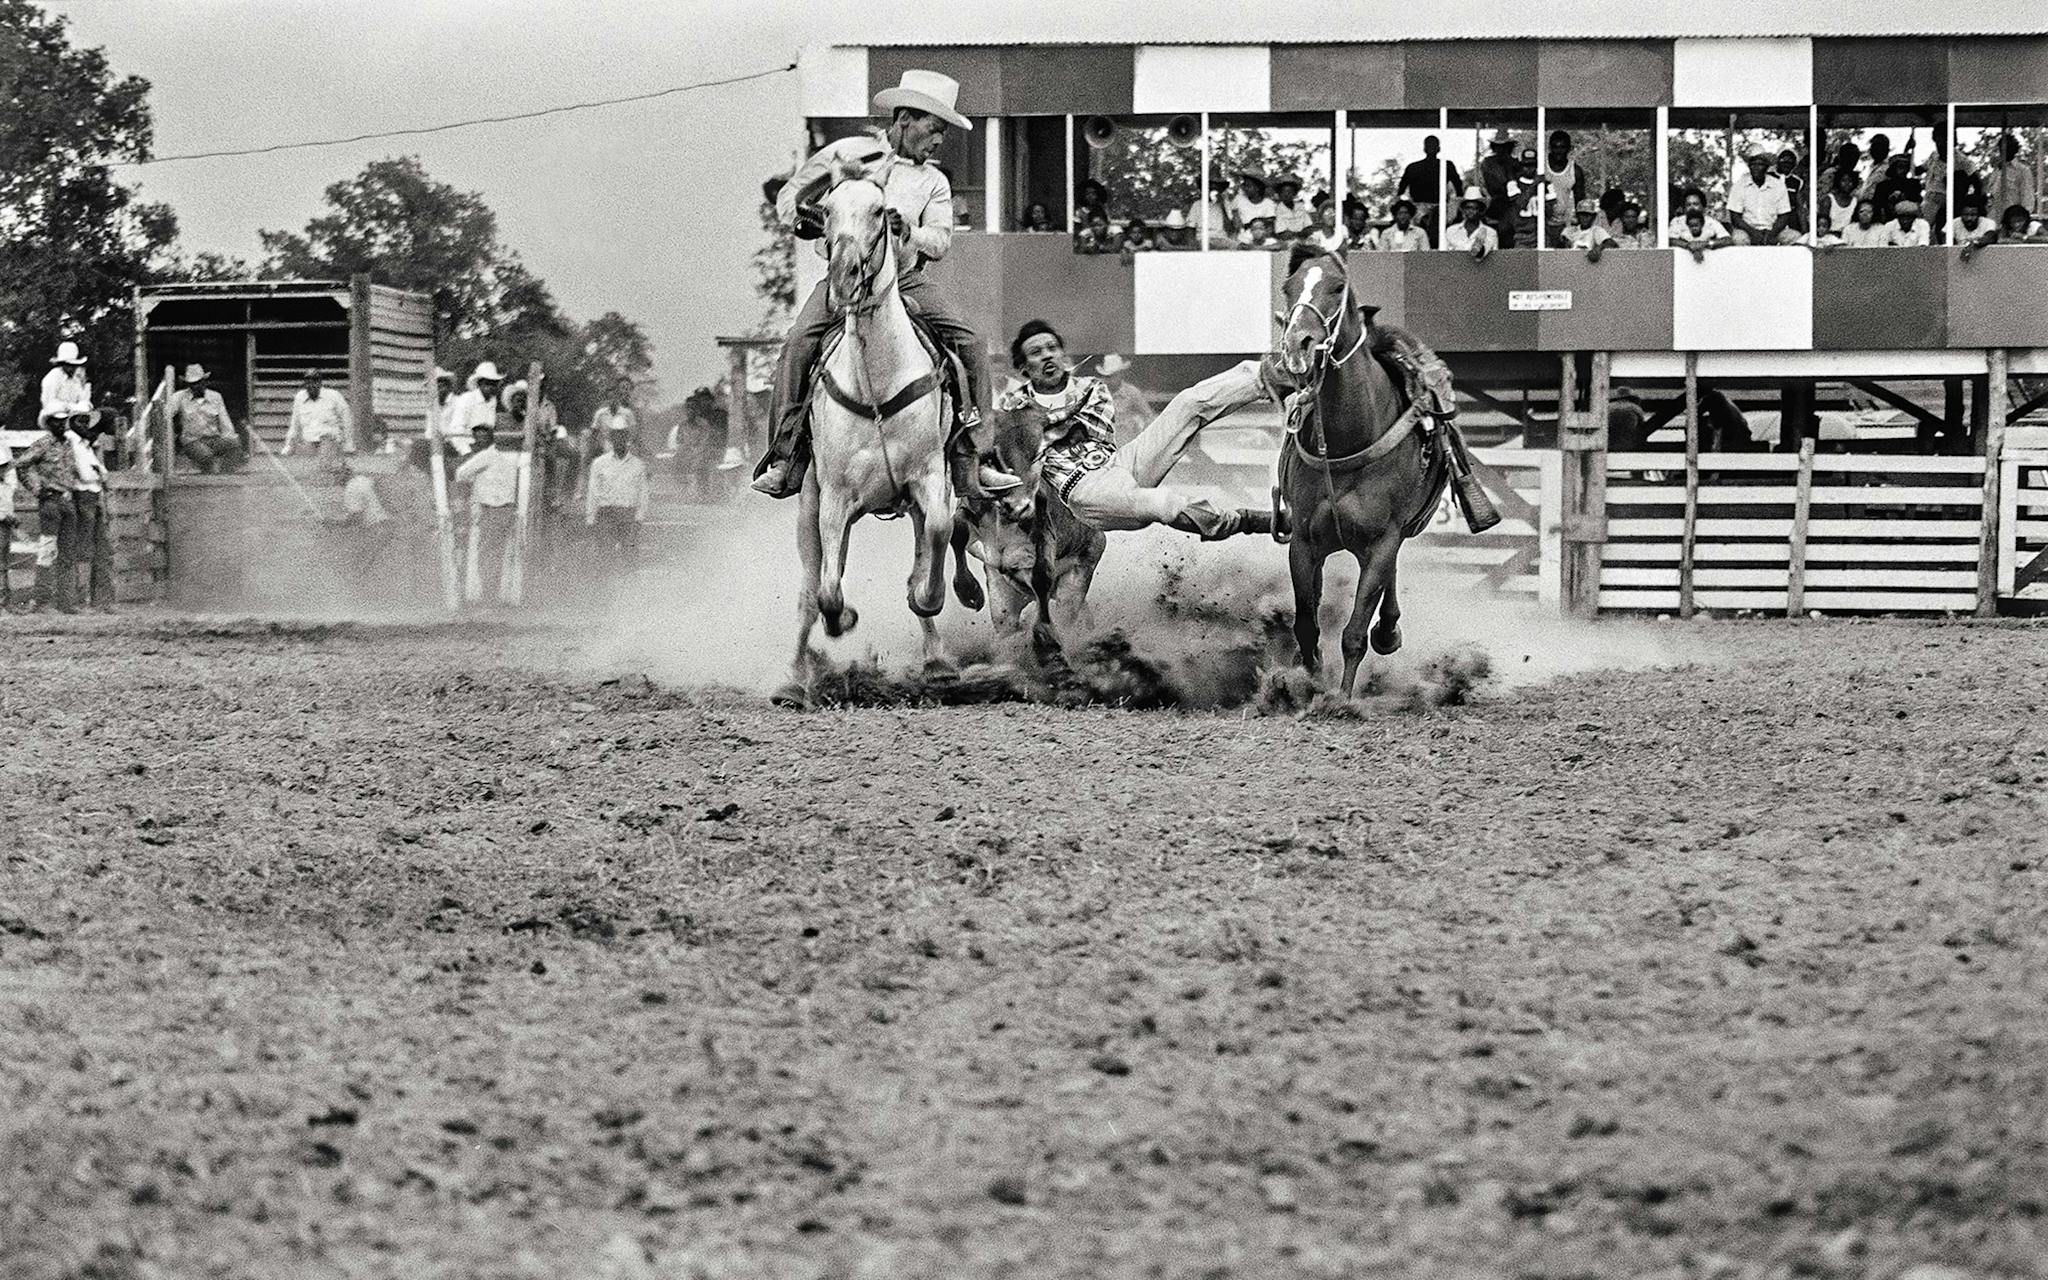 At the Diamond L, J. B. Collins herding the steer into position and Willie B. Pink dropping onto the animal’s head, as part of the 1978 steer-wrestling competition, an event devised by the first famous Black cowboy, Bill Pickett, a Texan.